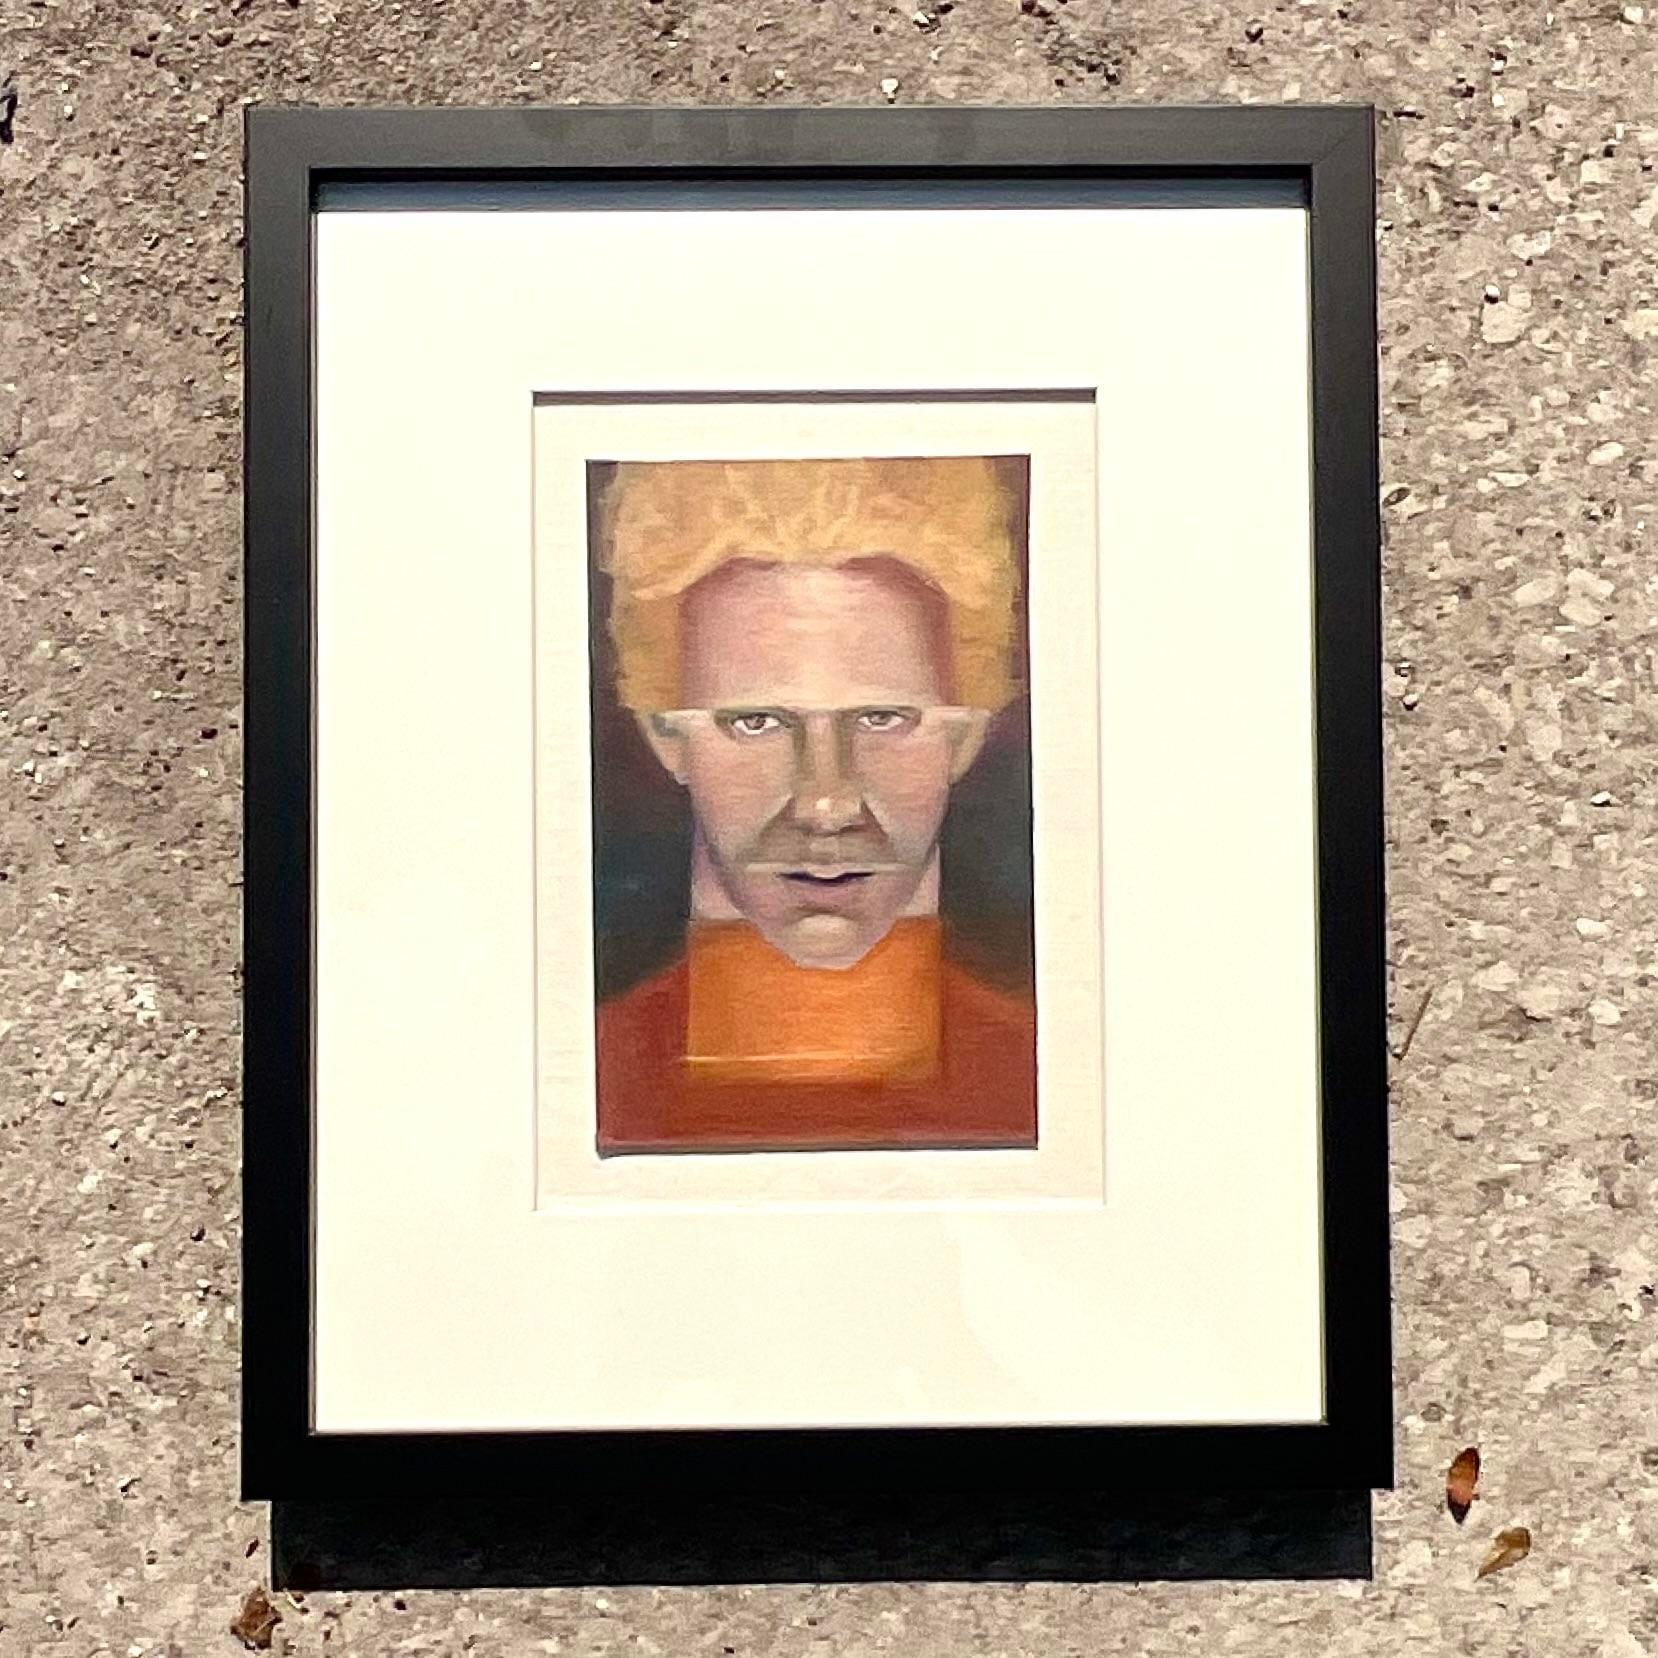 A fantastic vintage Boho original oil painting on board. A chic futuristic portrait in brilliant coloration. Signed on the back of the board. Newly framed under glass. Acquired from a Palm Beach estate.